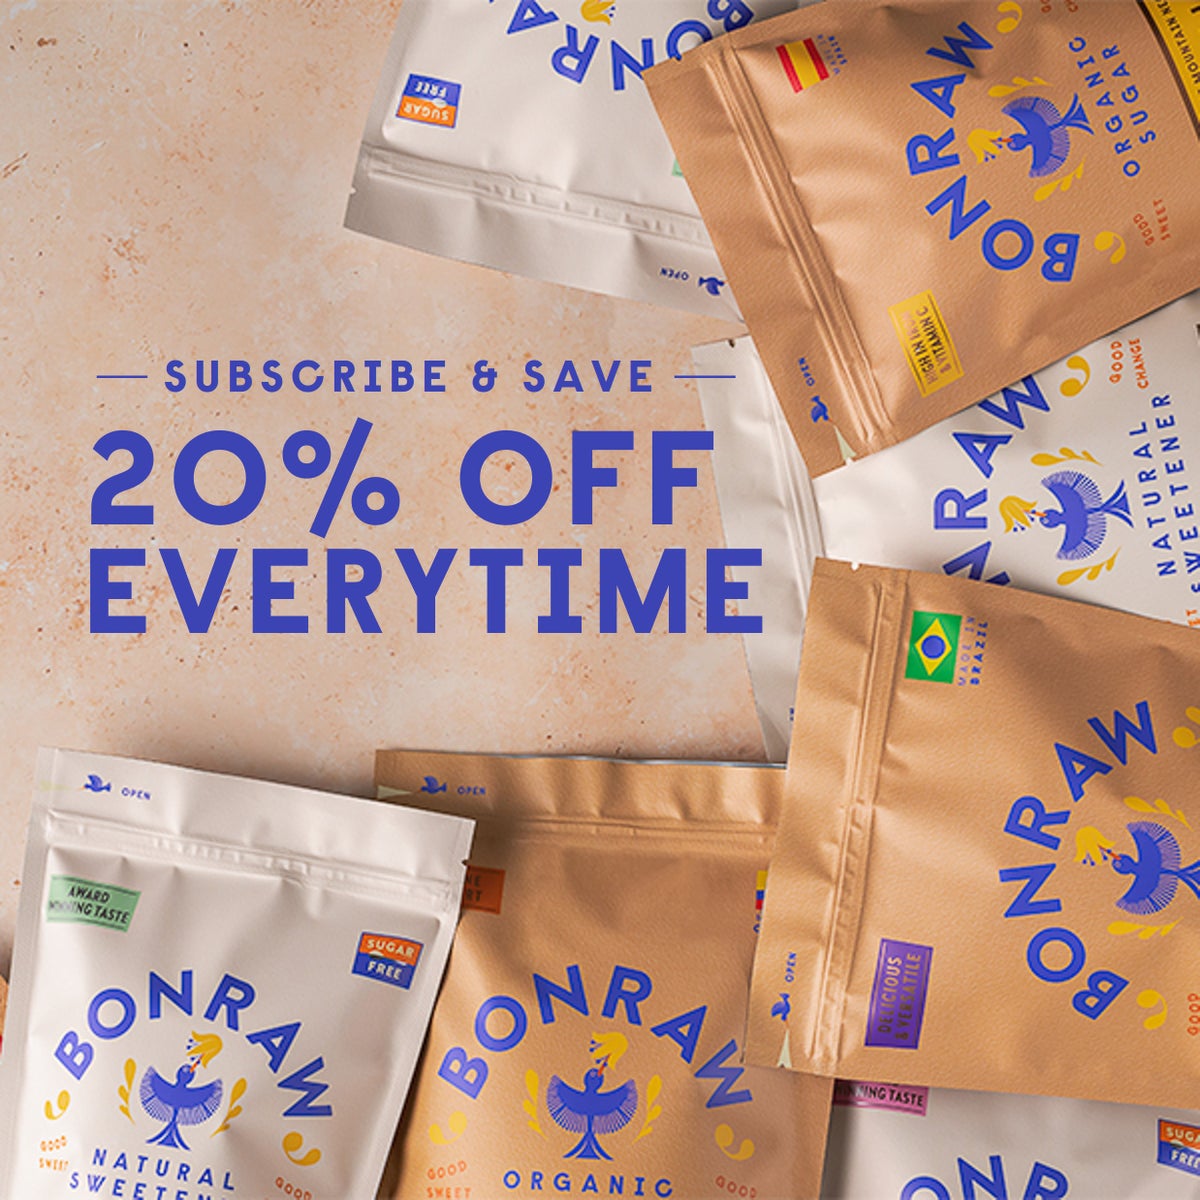 Subscribe and save 20% off. Shop now!